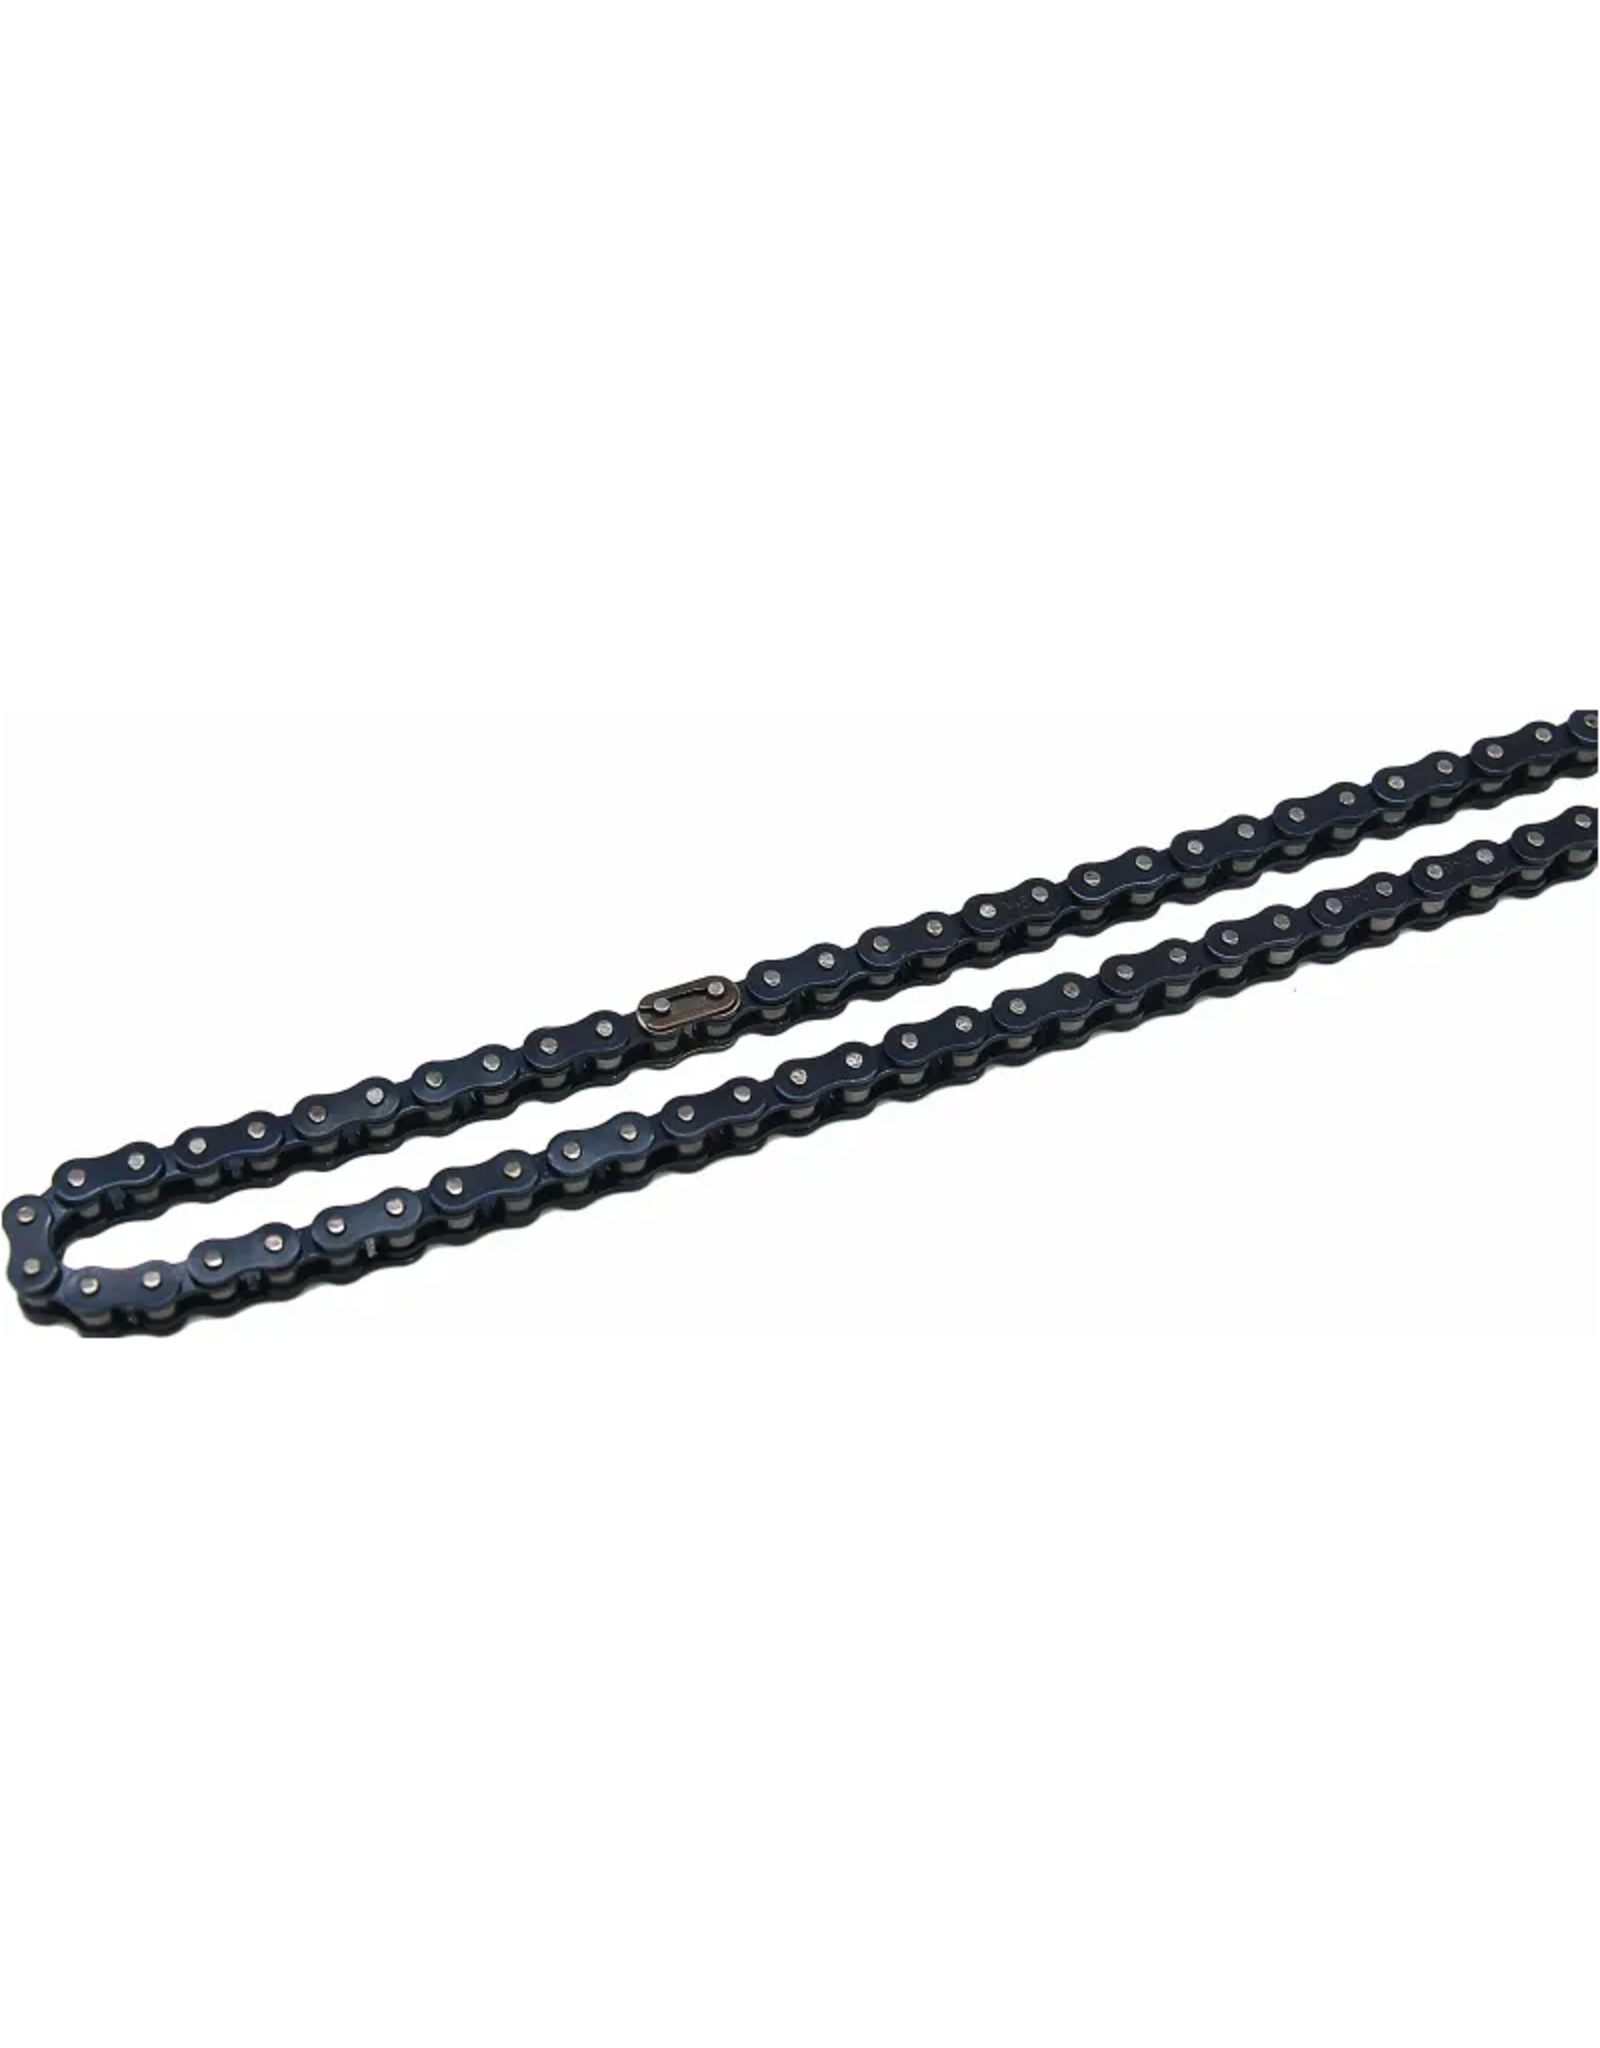 Hot Racing HRALPC40C70 Steel Chain 70 Roller with Chain Connector PM-MX